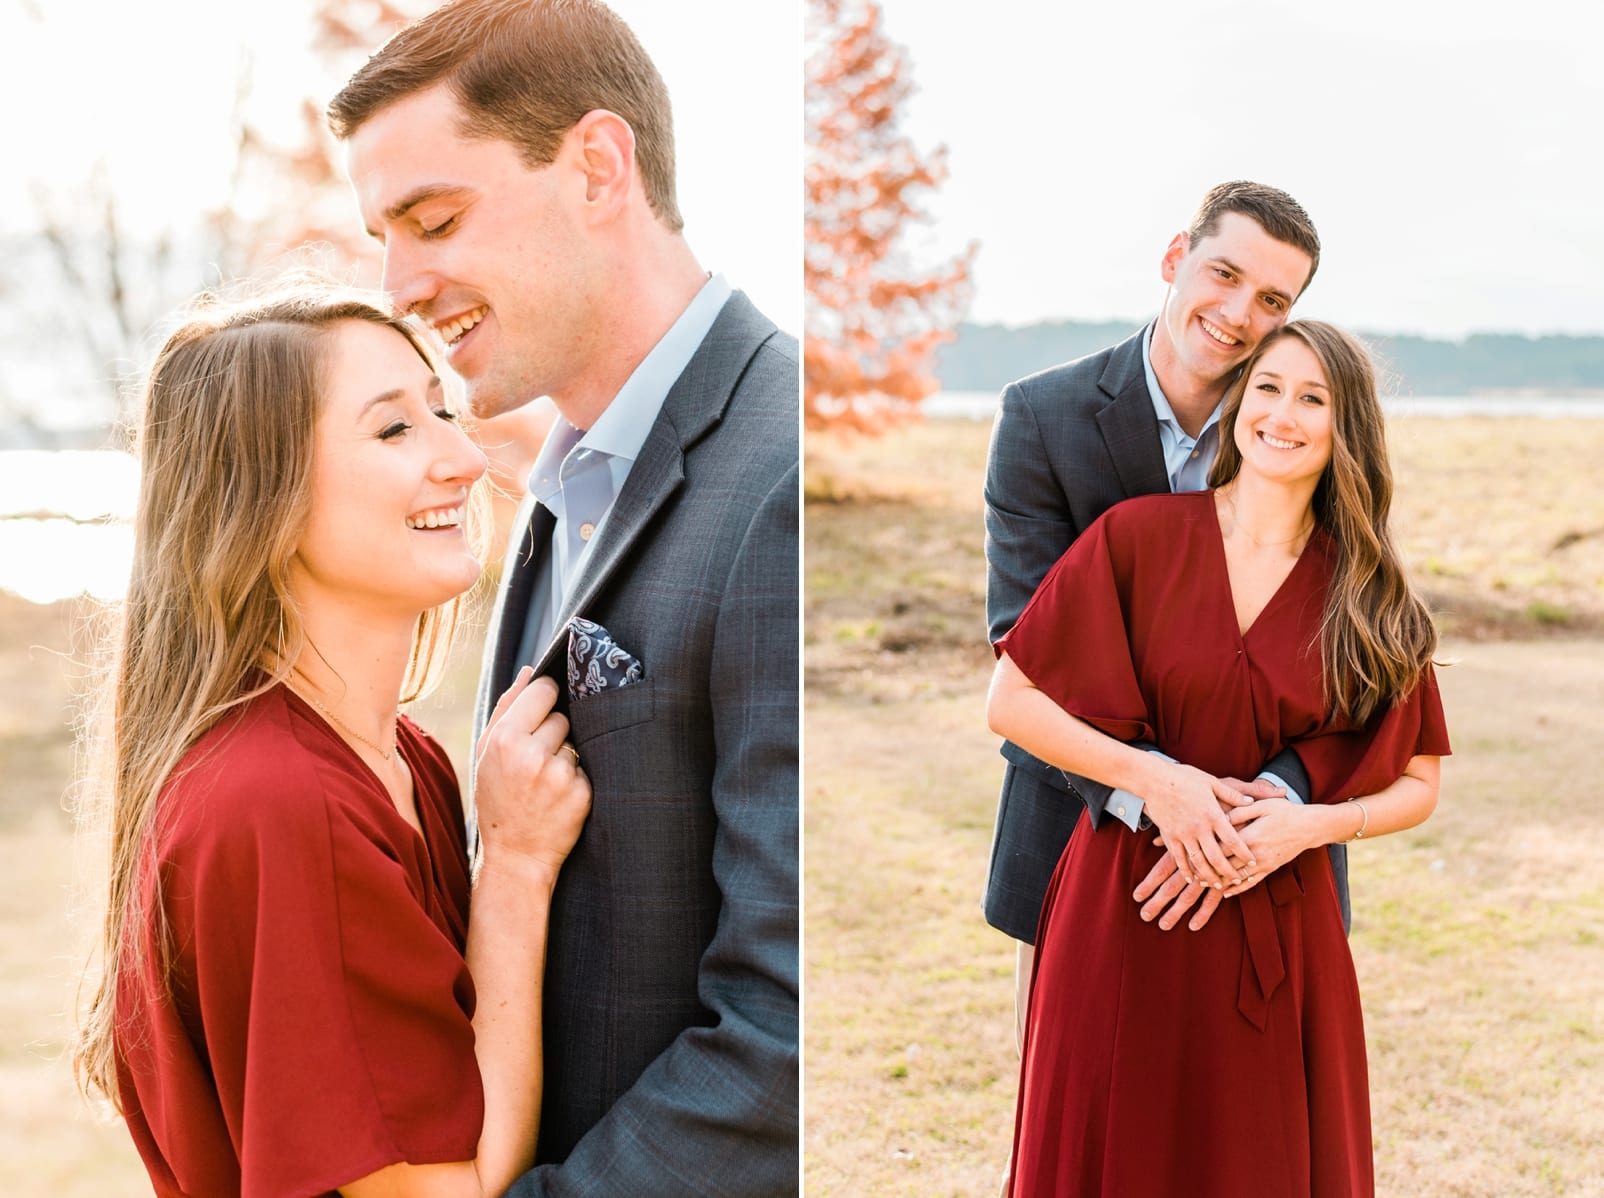 Raleigh couple wearing a long deep red dress and a dark suit for their engagement pictures photo